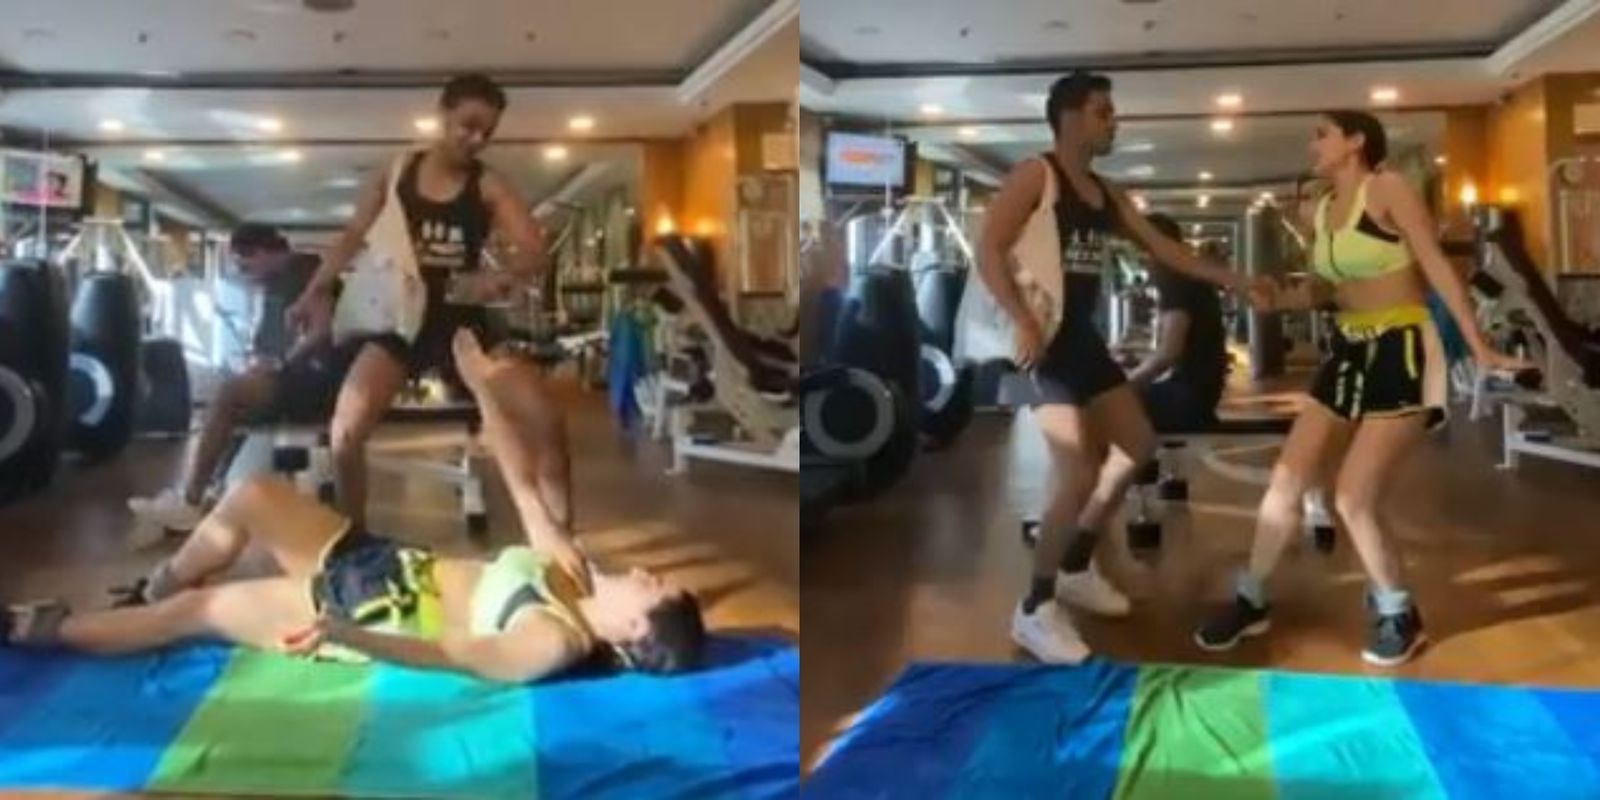 Sara Ali Khan Breaks Into a Dance On A 90s Song While Working Out In The Gym, Posts Hilarious Video